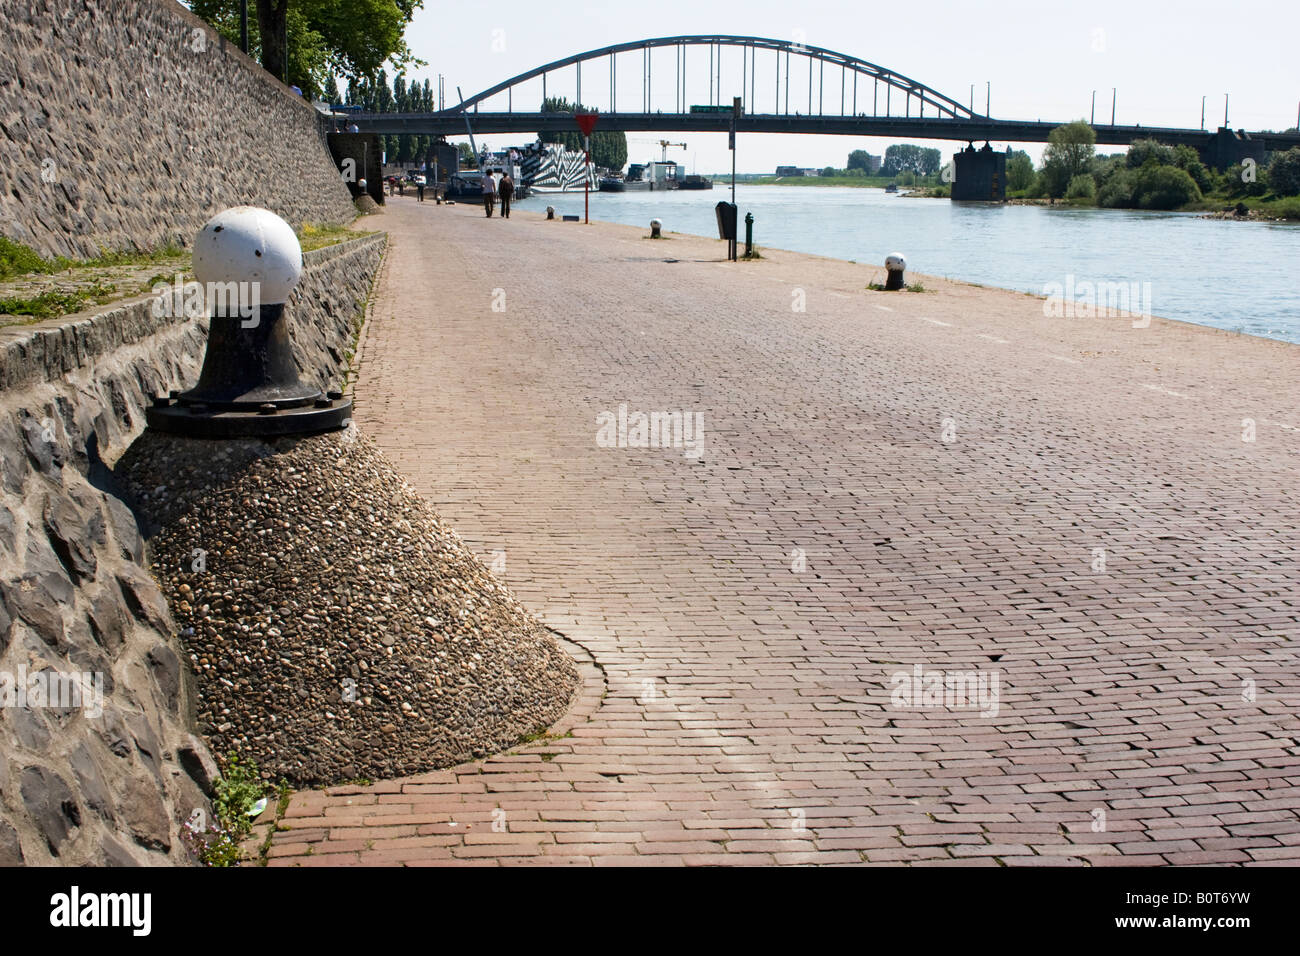 John Frost bridge crossing the river Rhine in Arnhem with mooring post in foreground. Stock Photo